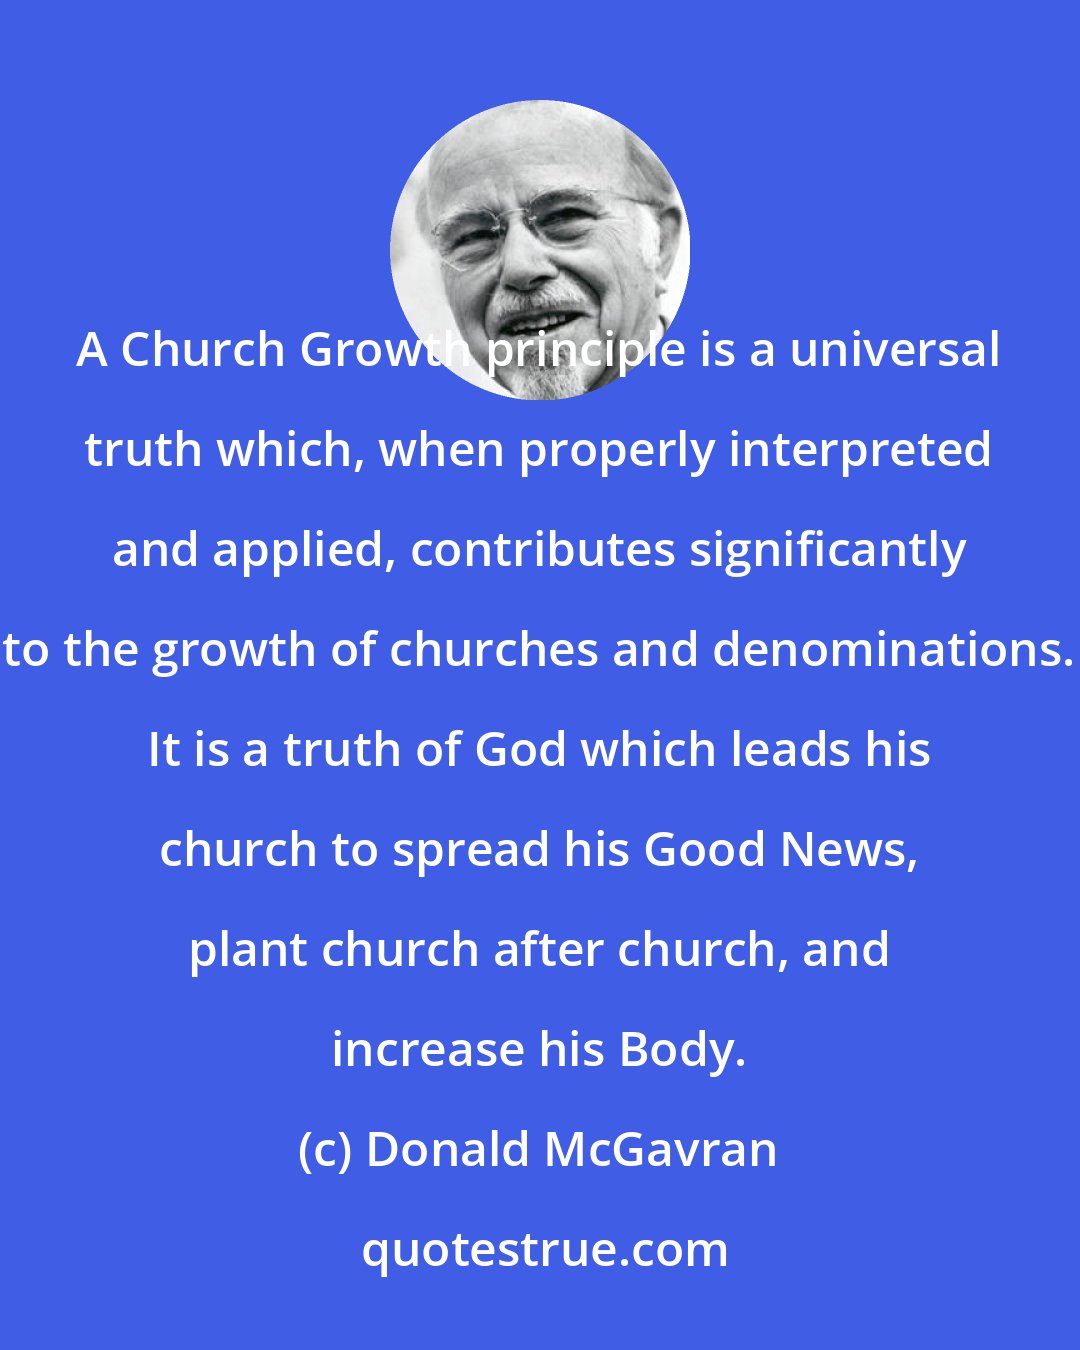 Donald McGavran: A Church Growth principle is a universal truth which, when properly interpreted and applied, contributes significantly to the growth of churches and denominations. It is a truth of God which leads his church to spread his Good News, plant church after church, and increase his Body.